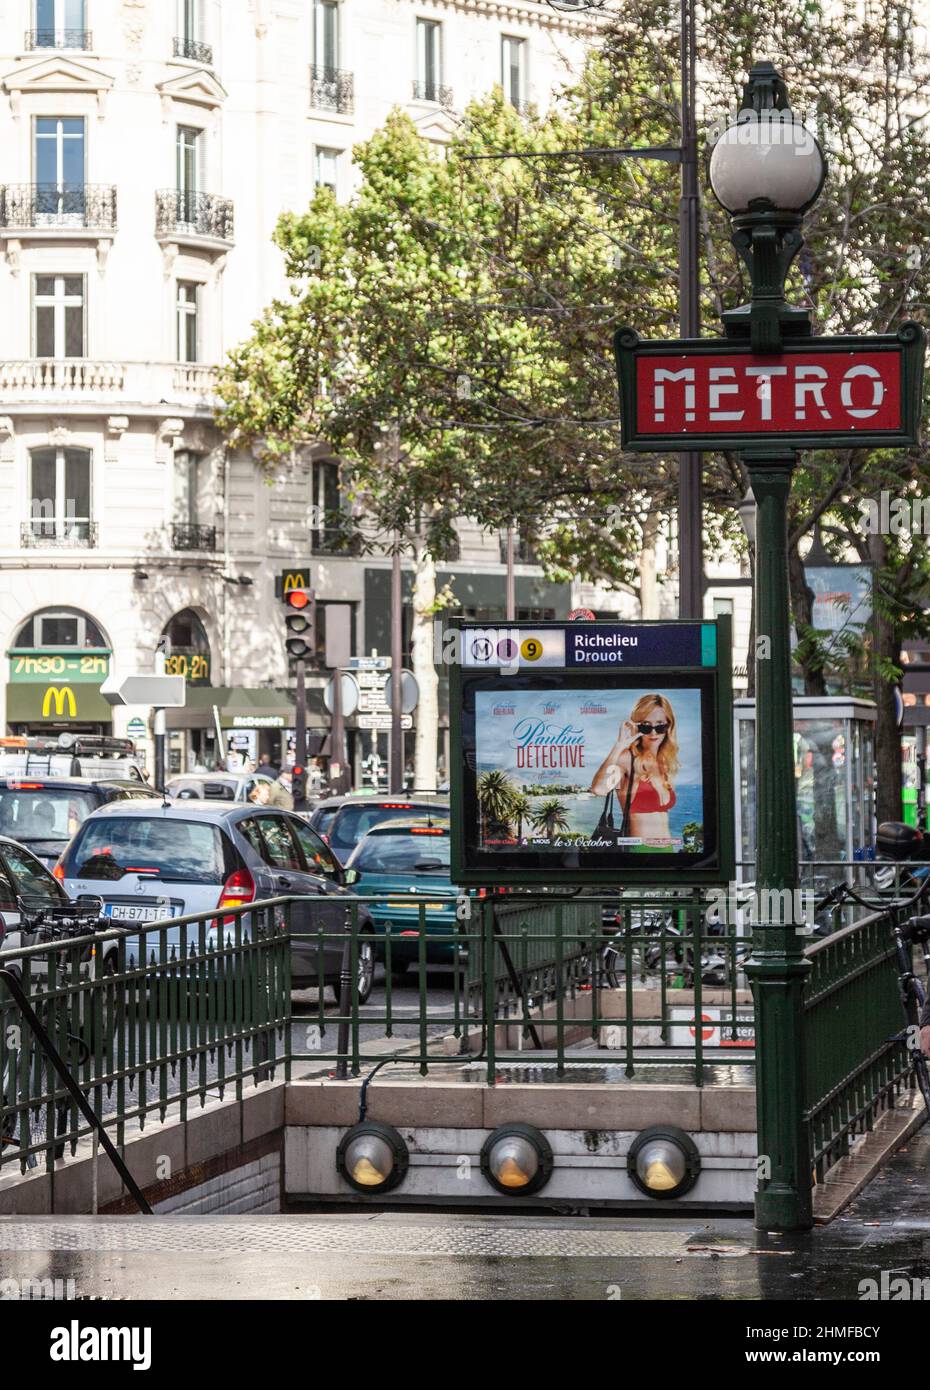 Jaurès Dervaux lamp post  style Metro sign outside the entrance to the Richelieu Drouot Metro station in central Paris, France. Stock Photo